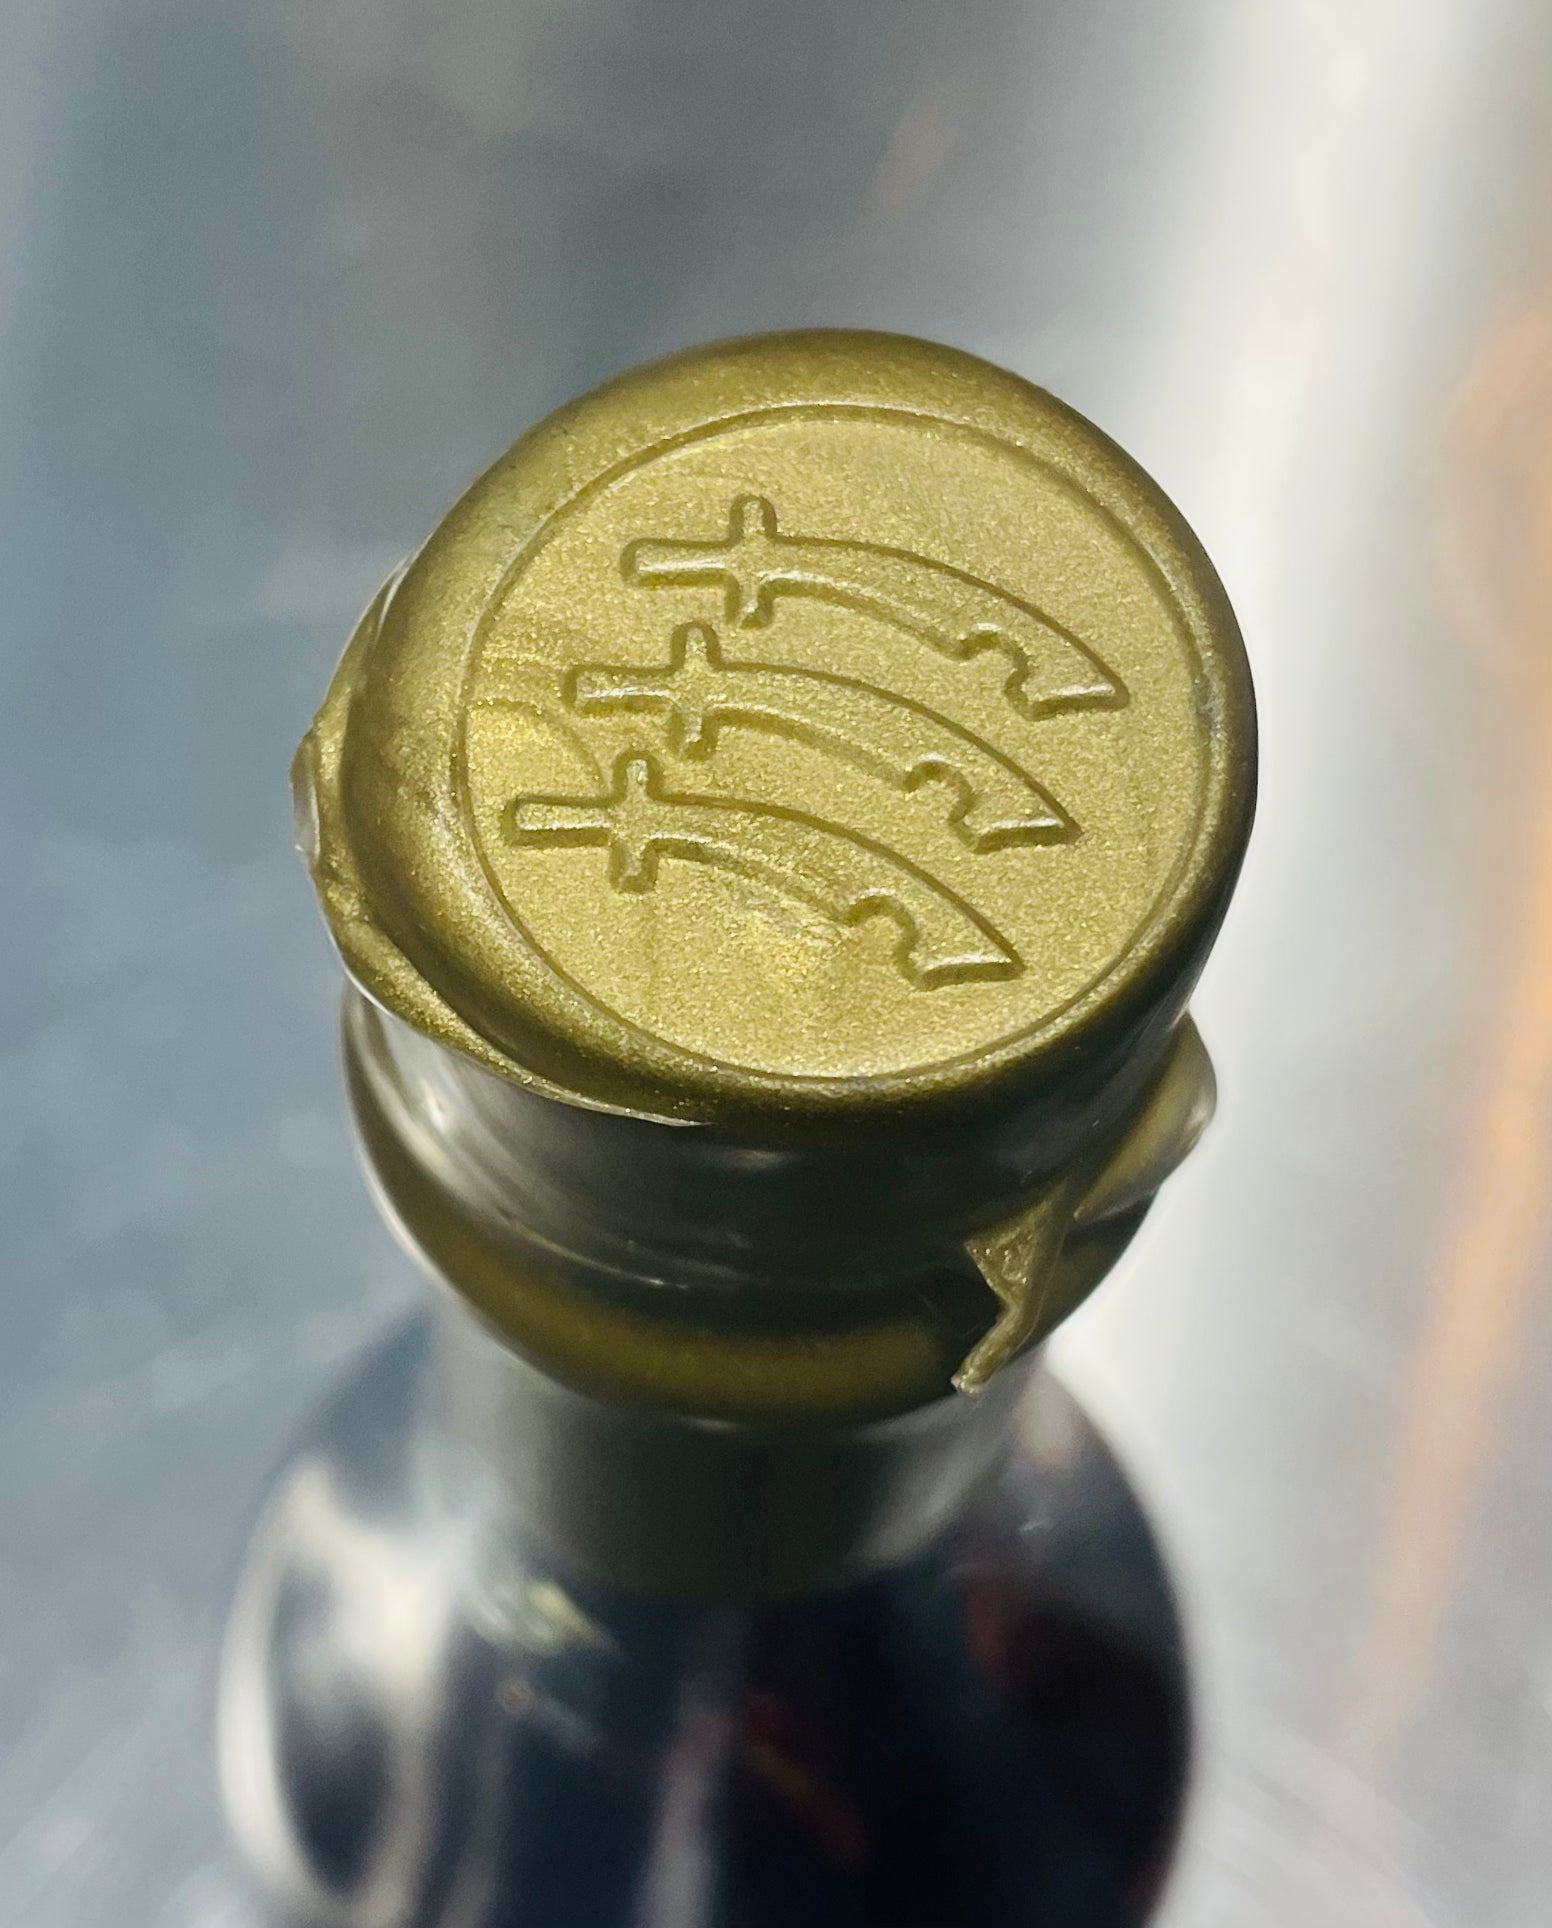 The wax seal of Essex swords on every Essex Spirits Company product